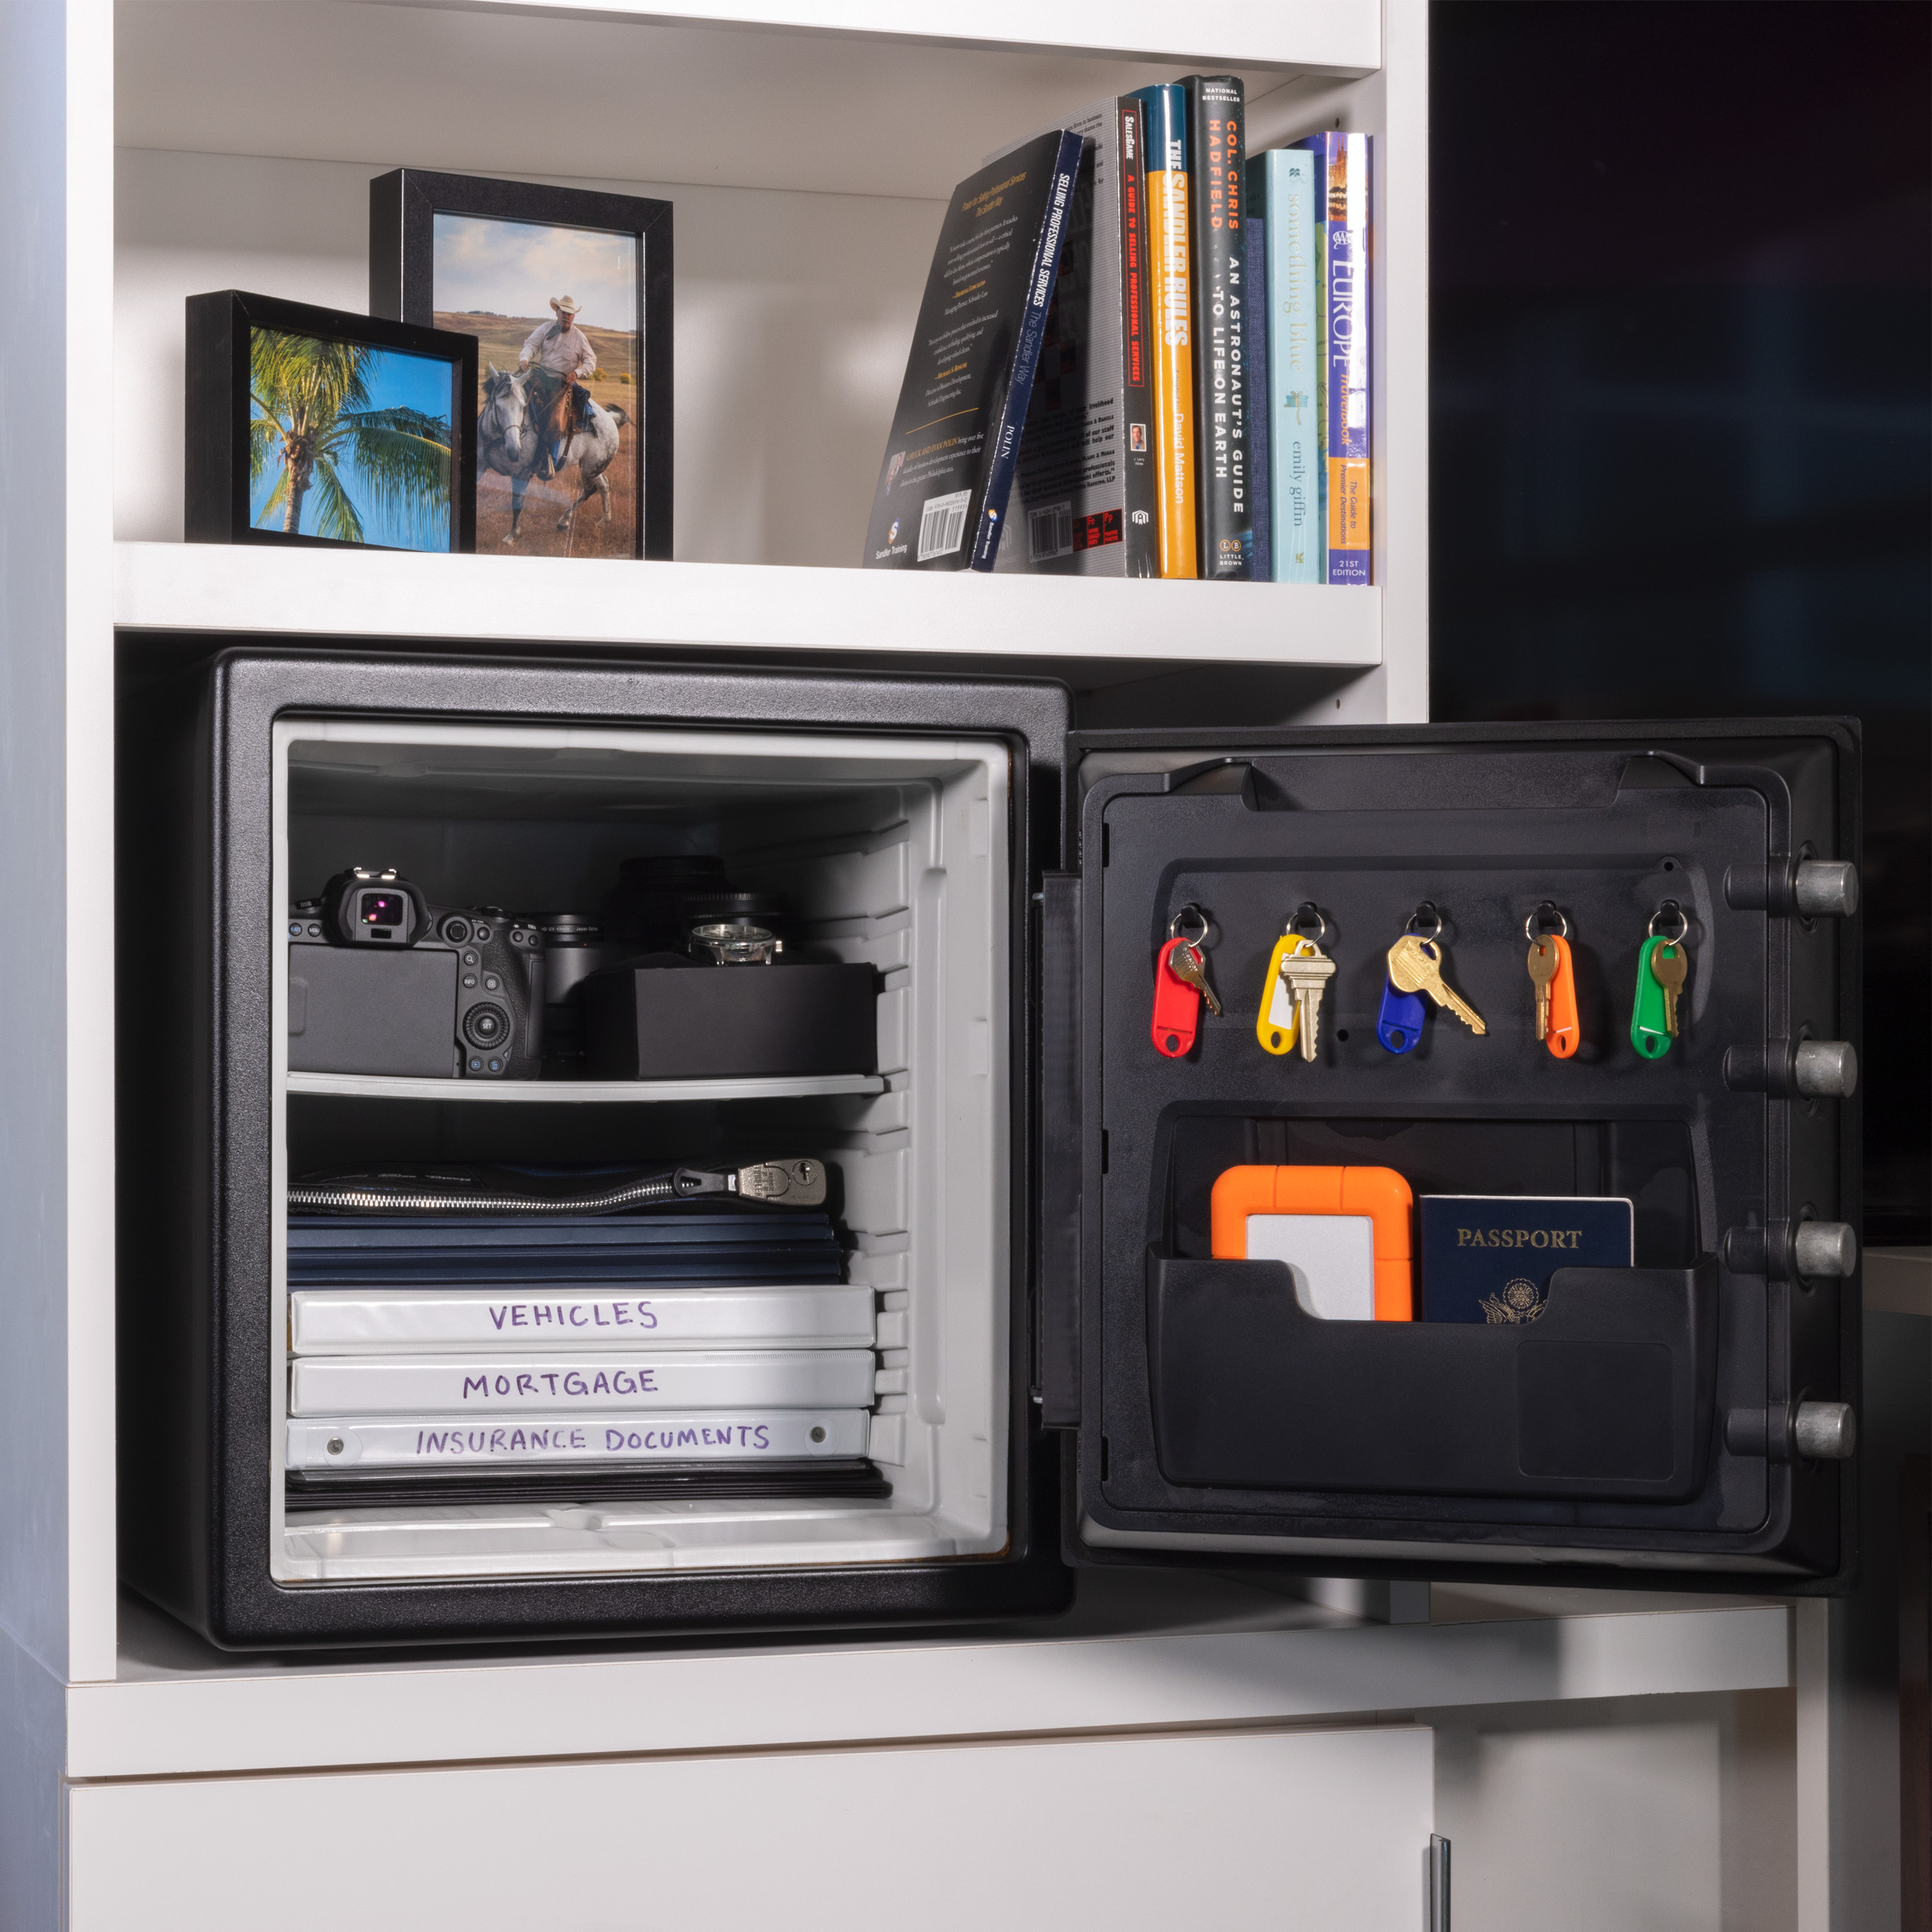 SentrySafe SFW123ES Water and Fire Resistant Safe with Digital Keypad Lock, 1.23 Cu. ft. - image 3 of 7